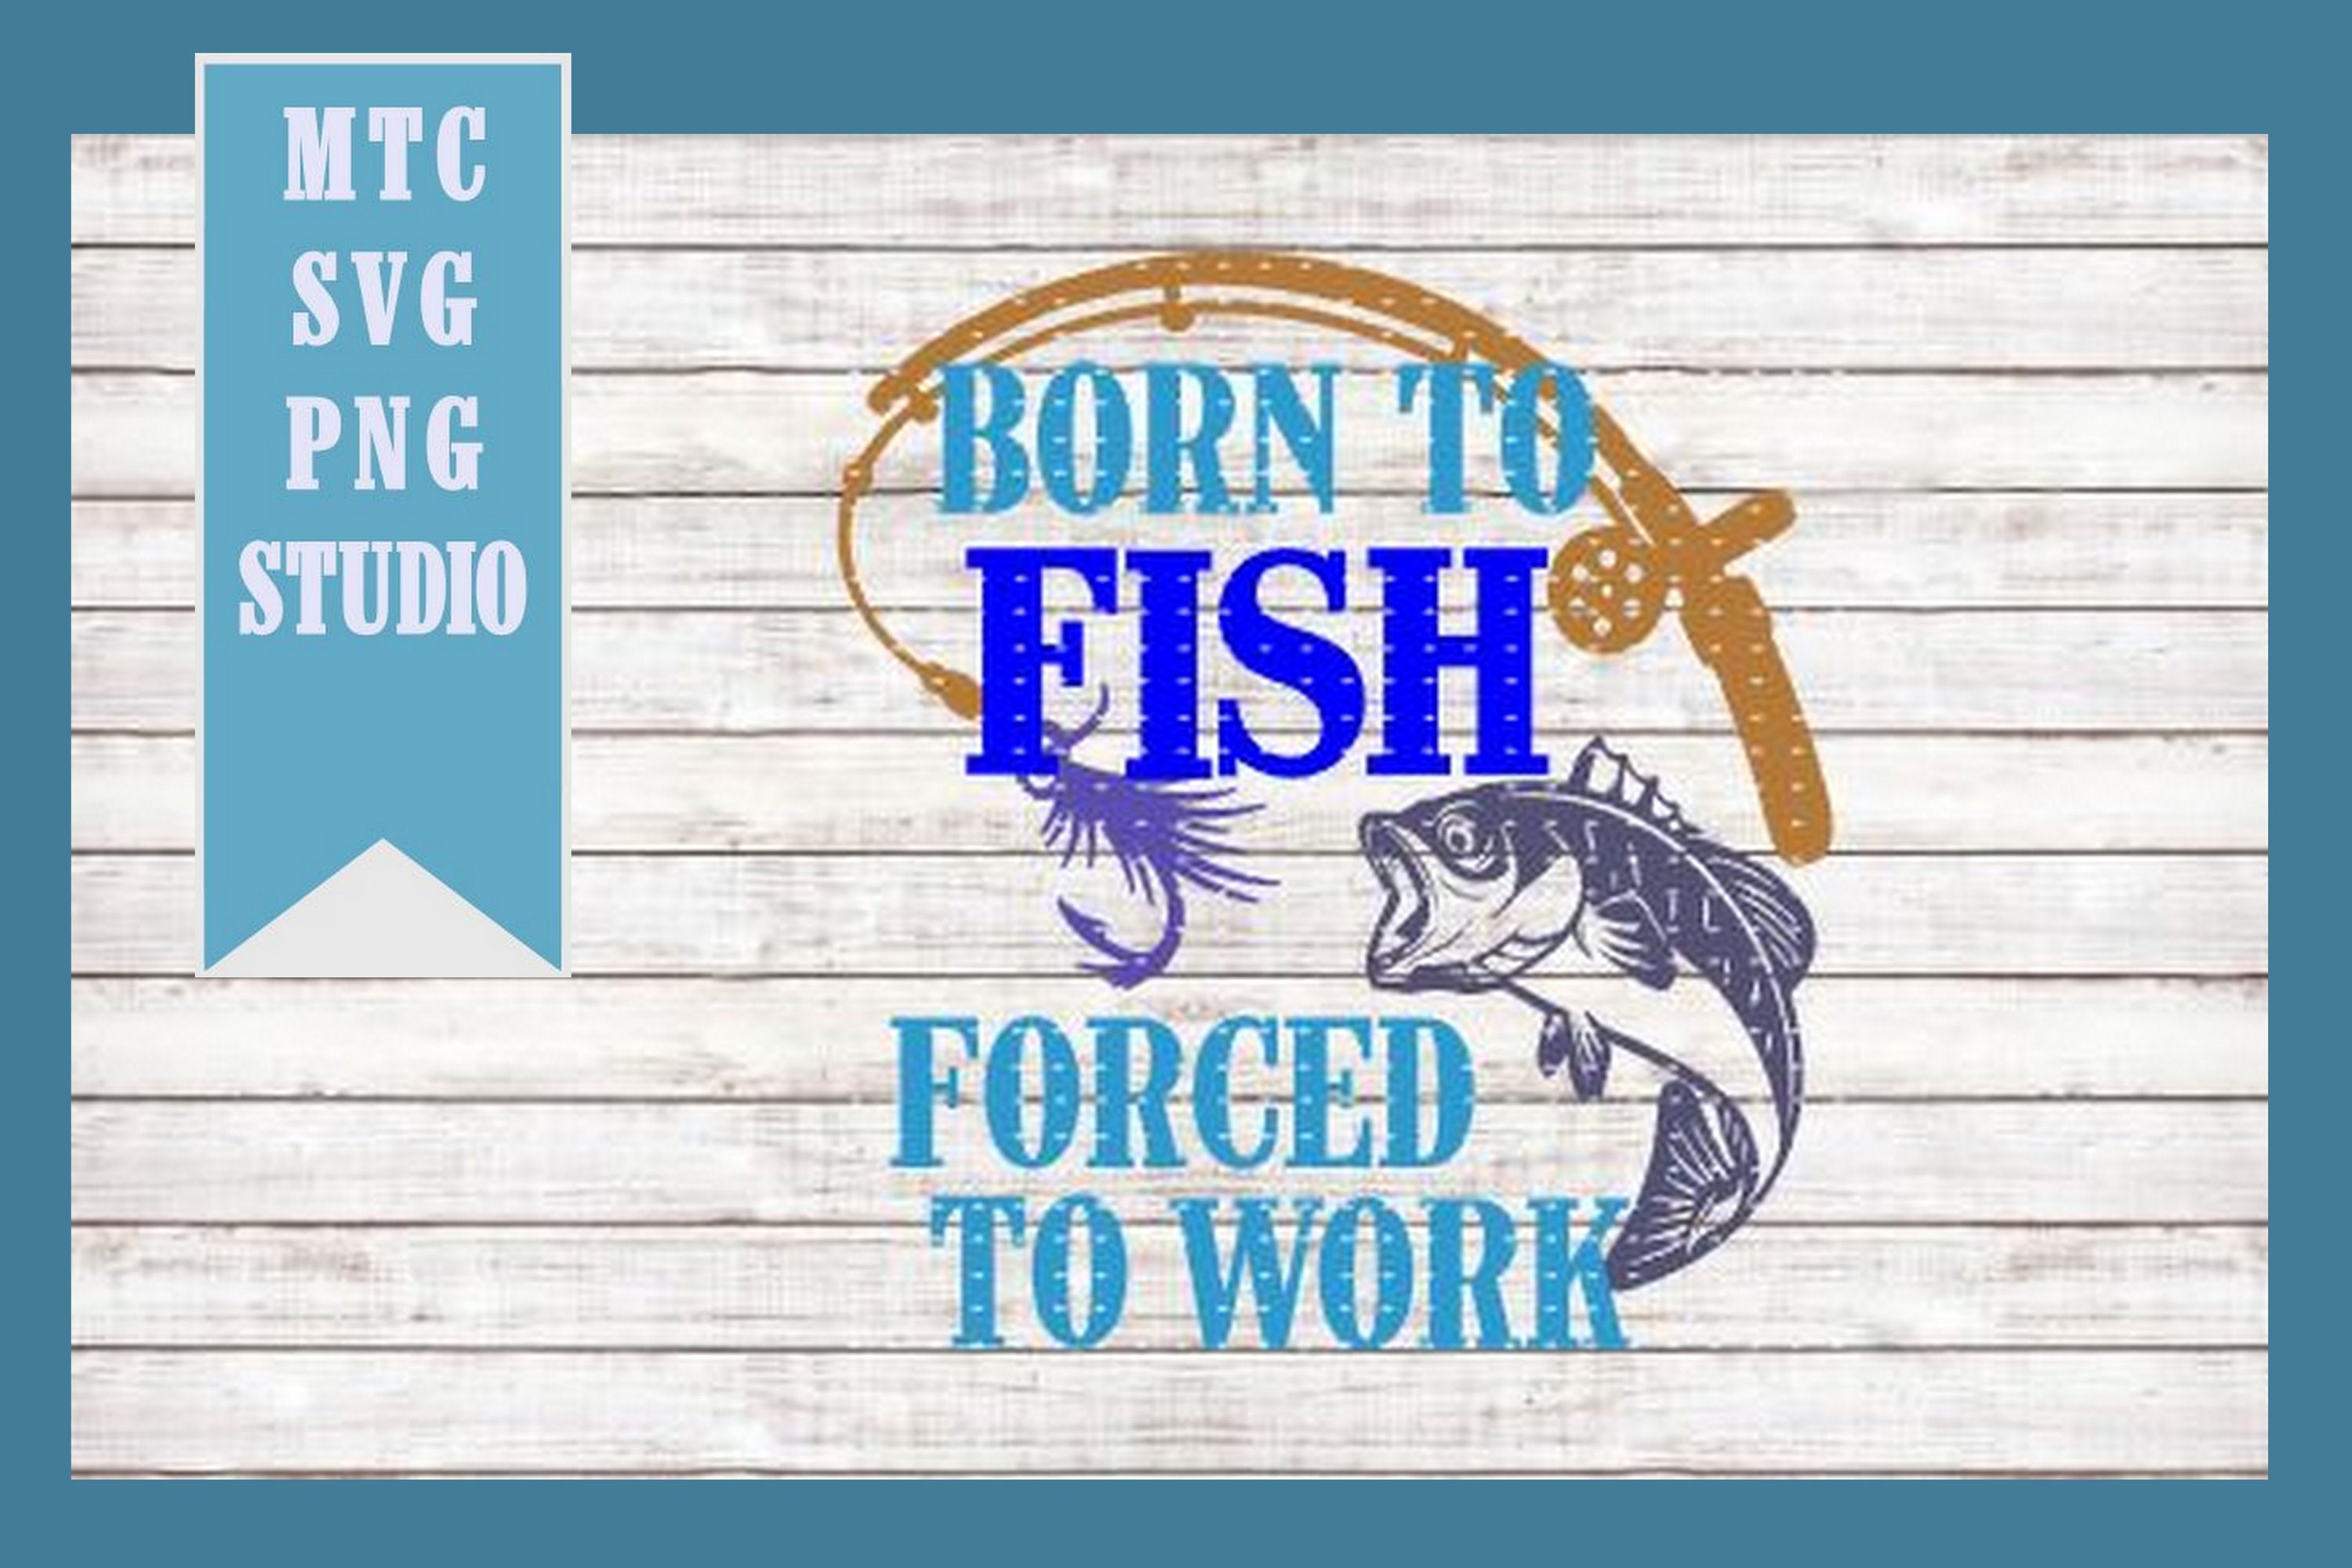 SVG Cut Files Born to Fish Forced to Work Quote Saying 01 Embellishment MTC  SCAL Cricut Silhouette Cutting File 